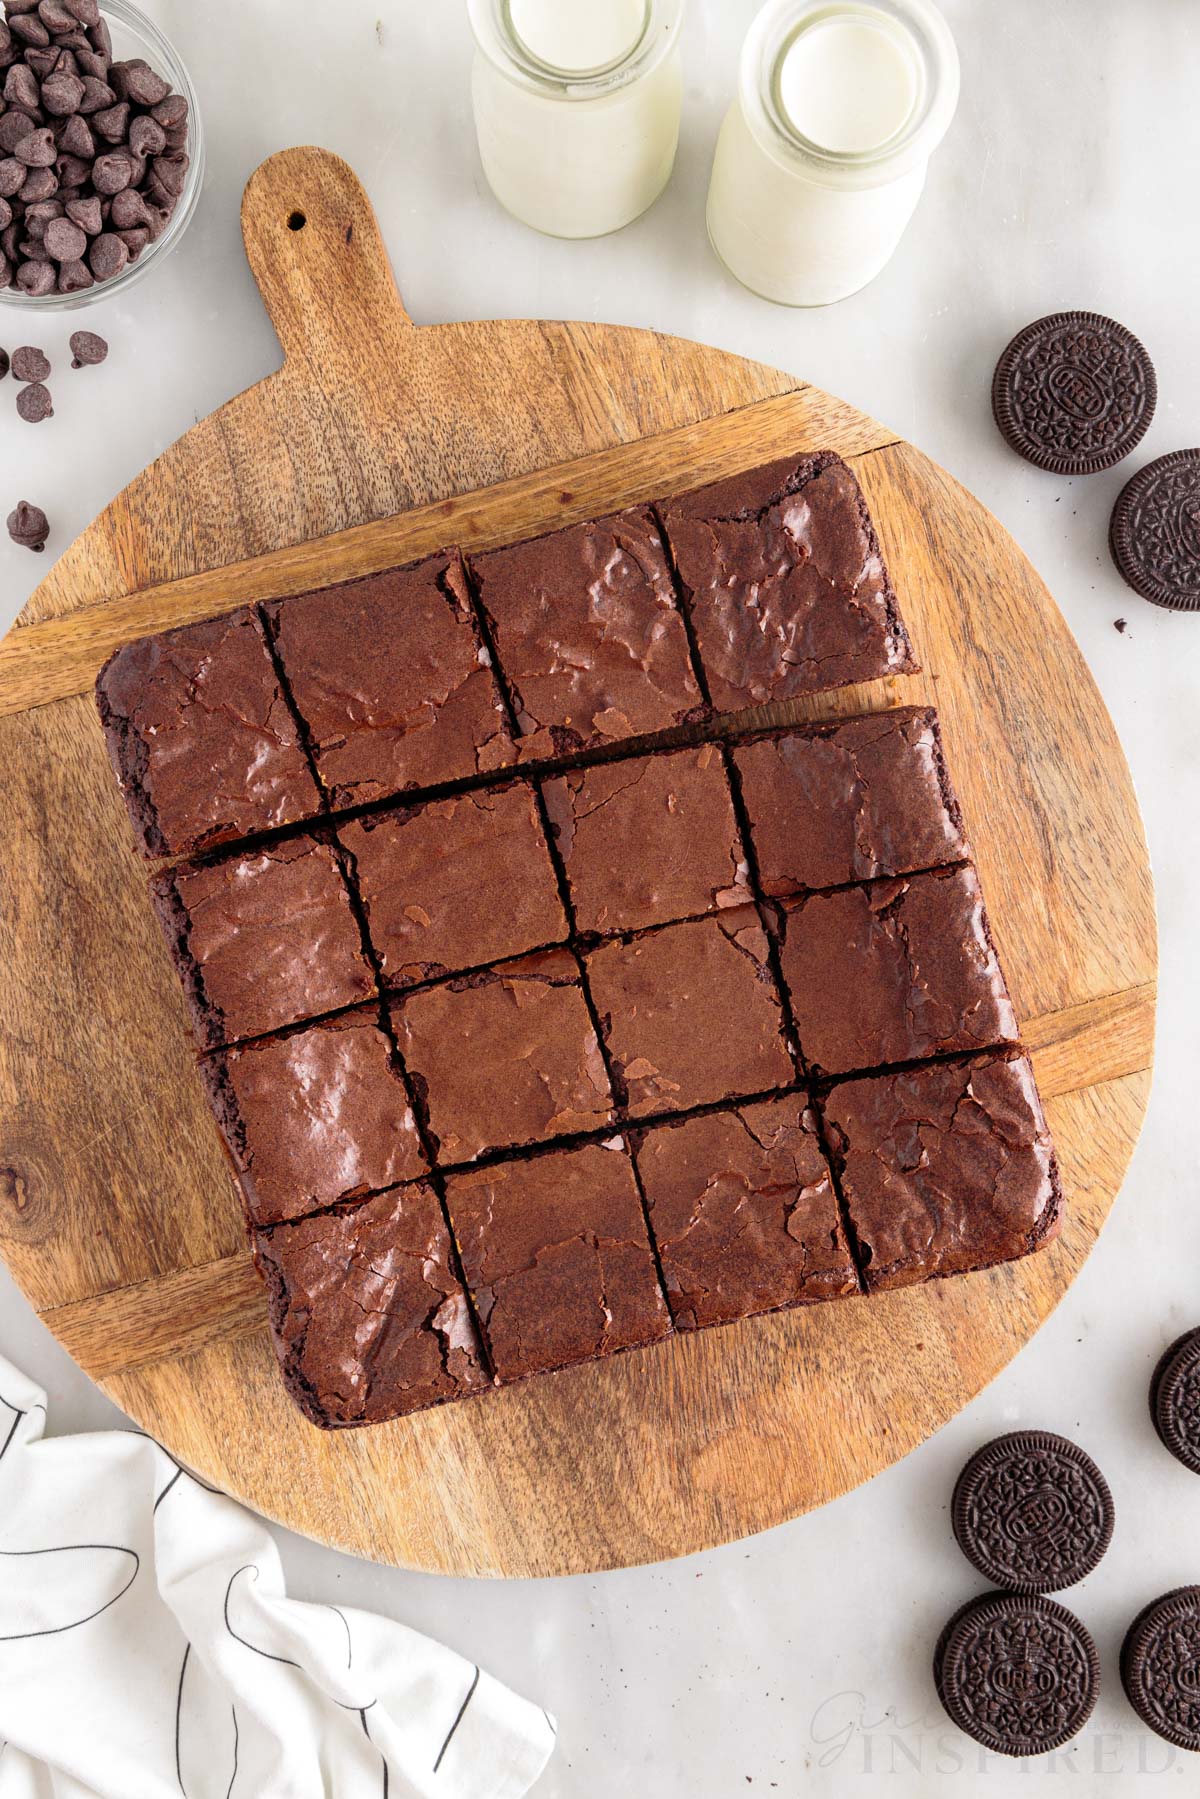 Slutty Brownies cut into squares on a round wooden cutting board next to chocolate chips, milk and Oreo´s.